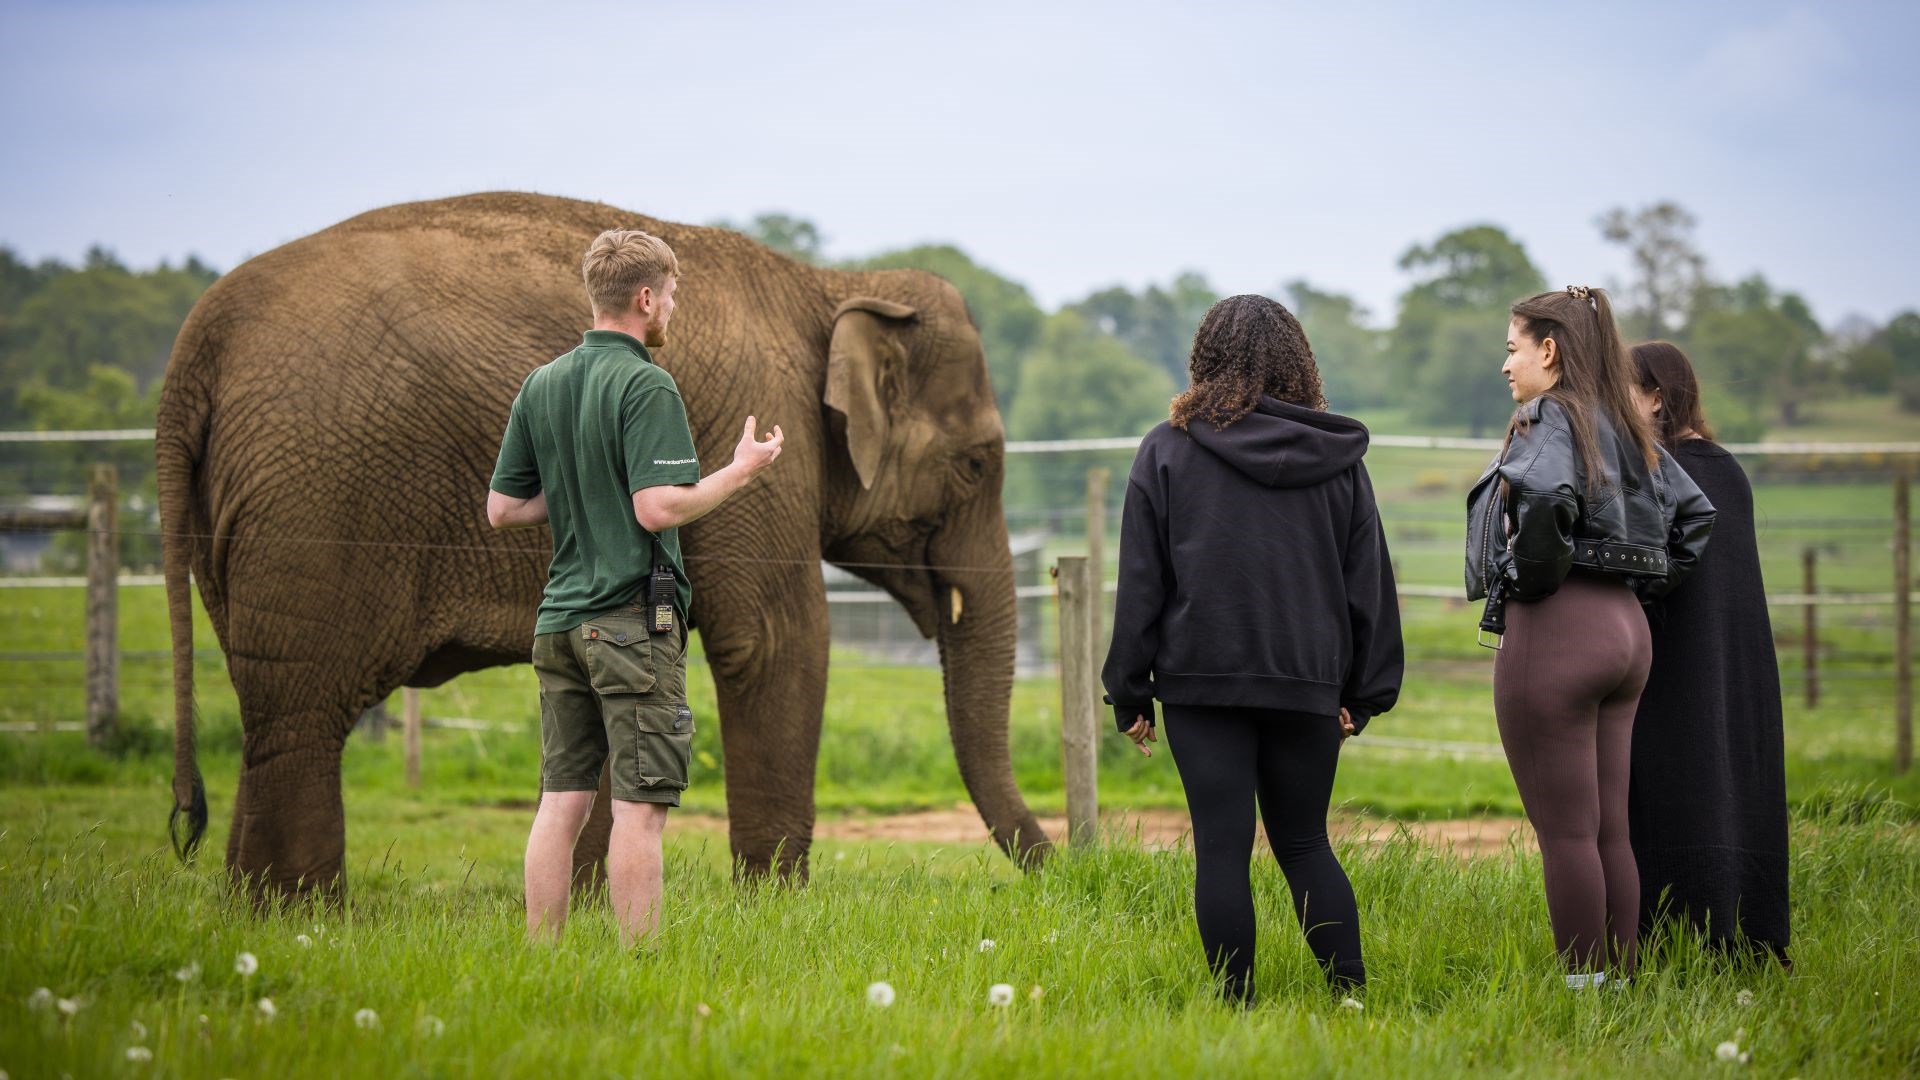 Three women stand with elephant keeper in woburn safari park uniform as asian elephant tarli grazes in the background behind them 